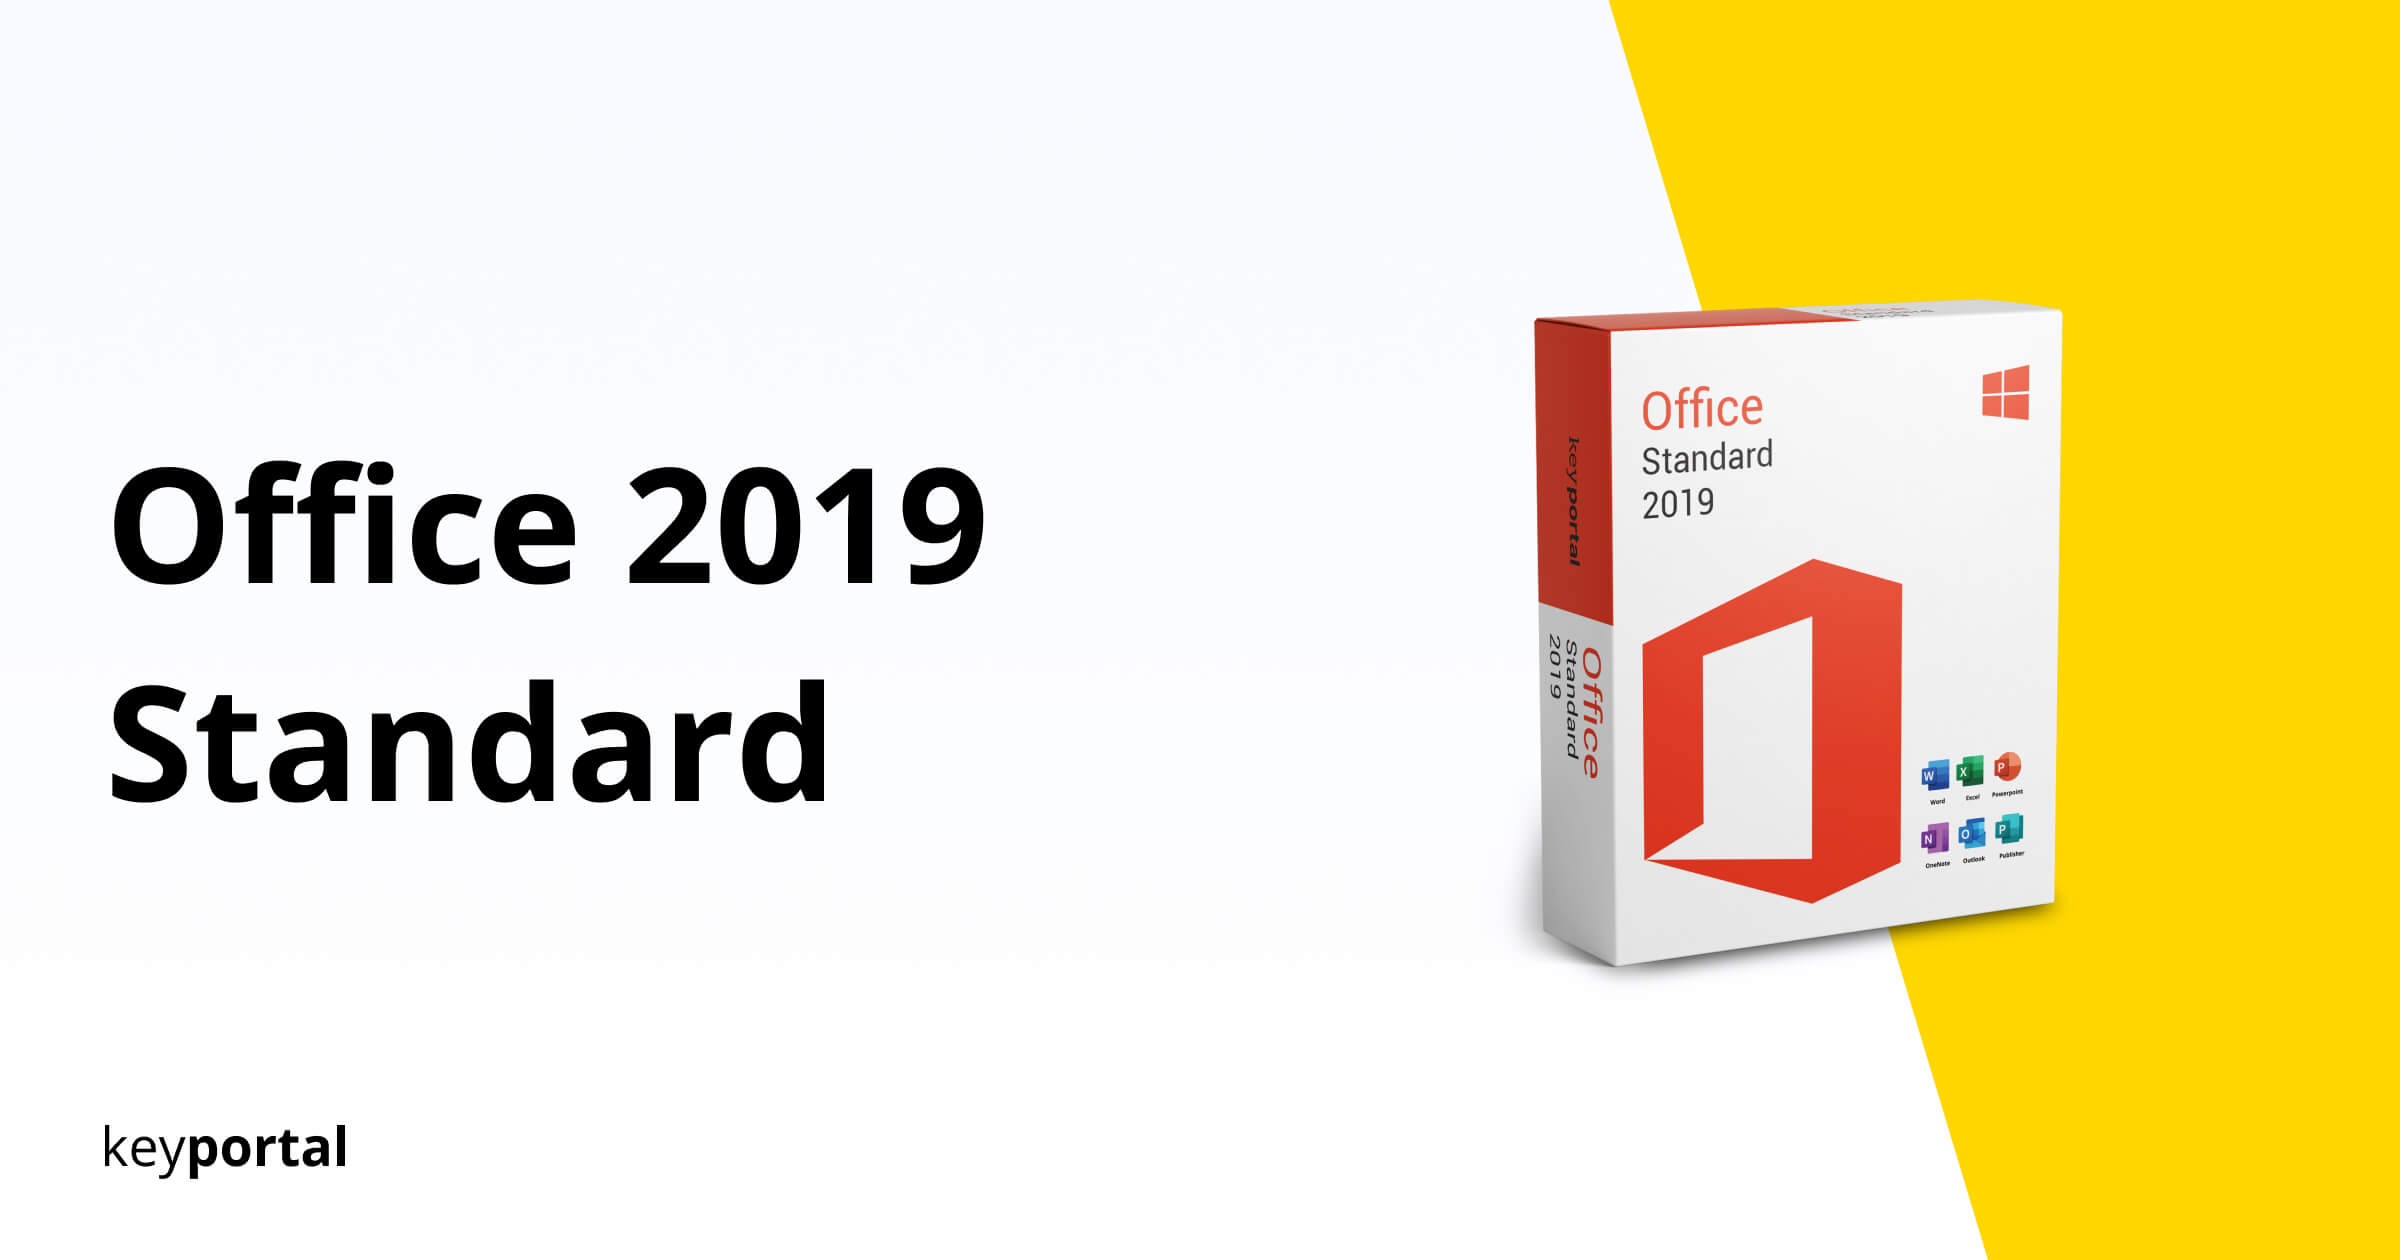 microsoft office home and business 2019 iso